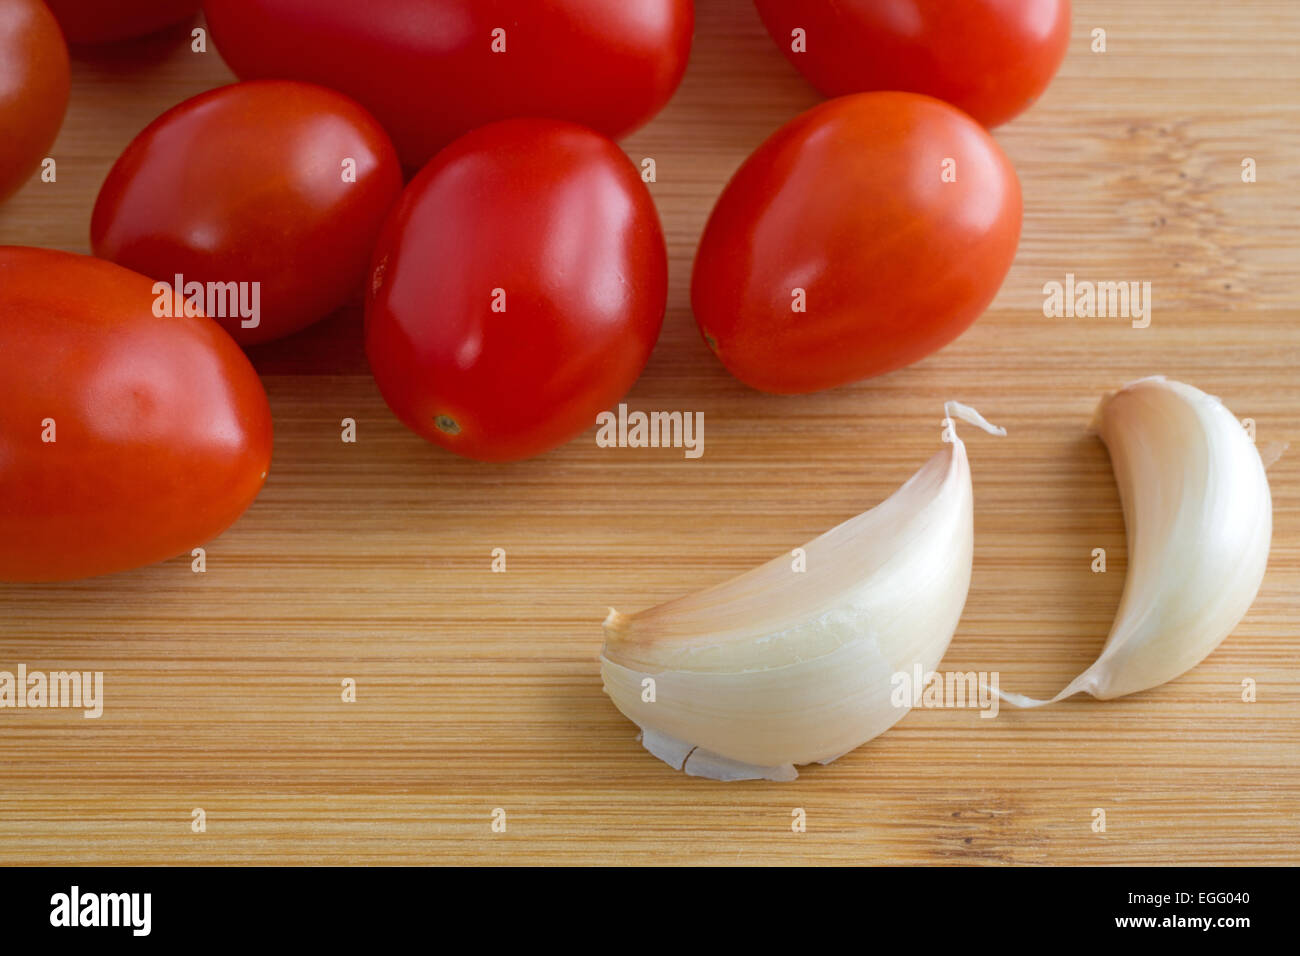 Close view of two garlic cloves with grape tomatoes on a wood cutting board. Stock Photo